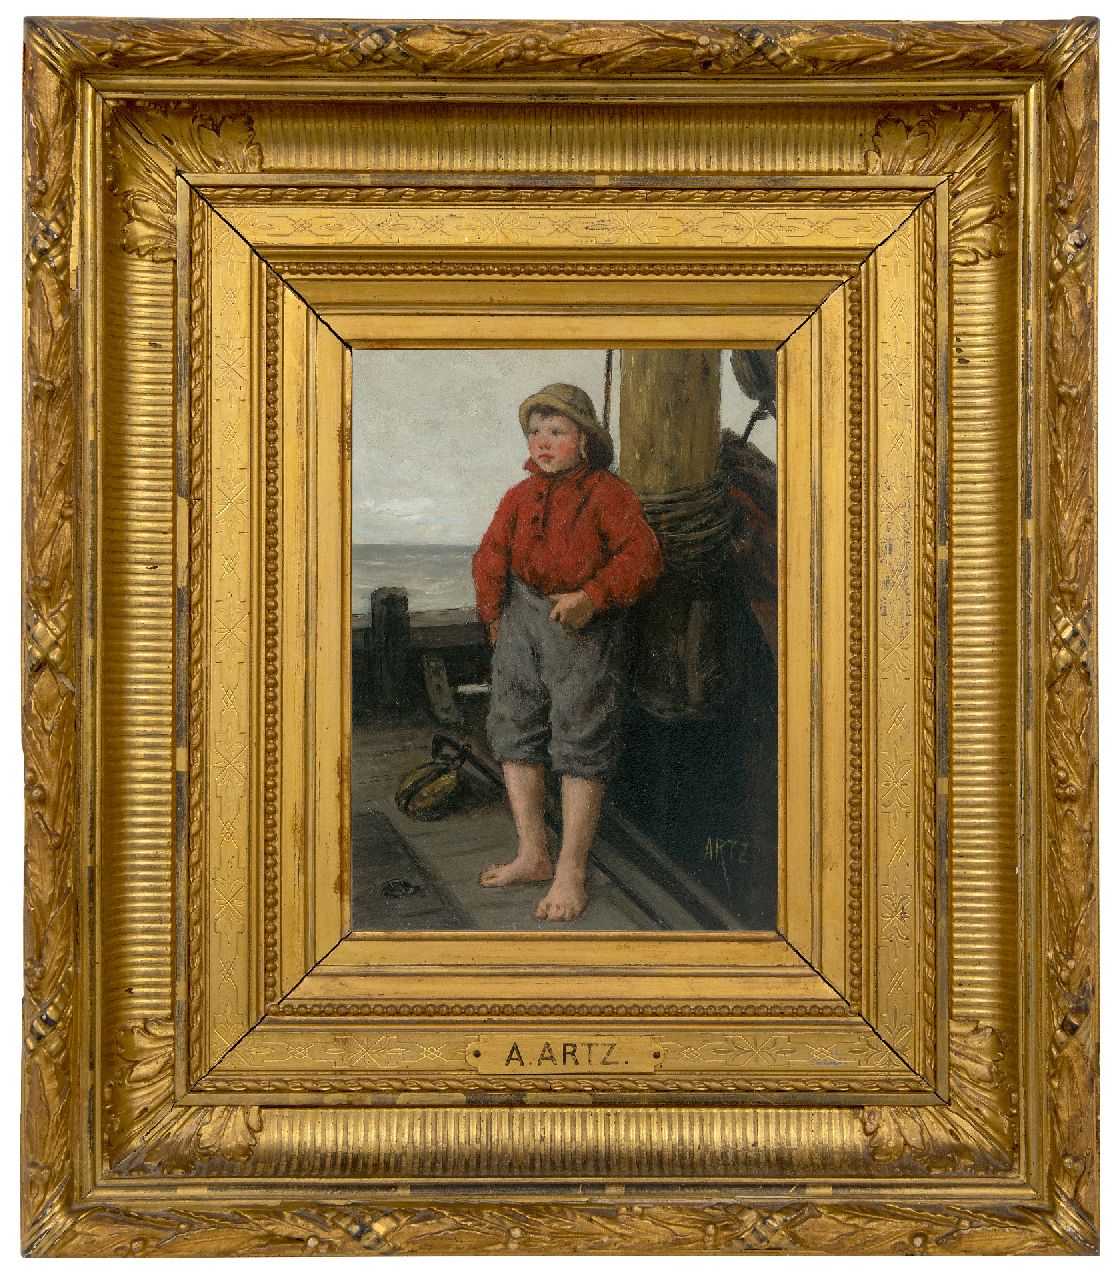 Artz D.A.C.  | David Adolphe Constant Artz | Paintings offered for sale | A fisherman's boy from Katwijk in a red jumper, oil on panel 22.5 x 16.2 cm, signed l.r.